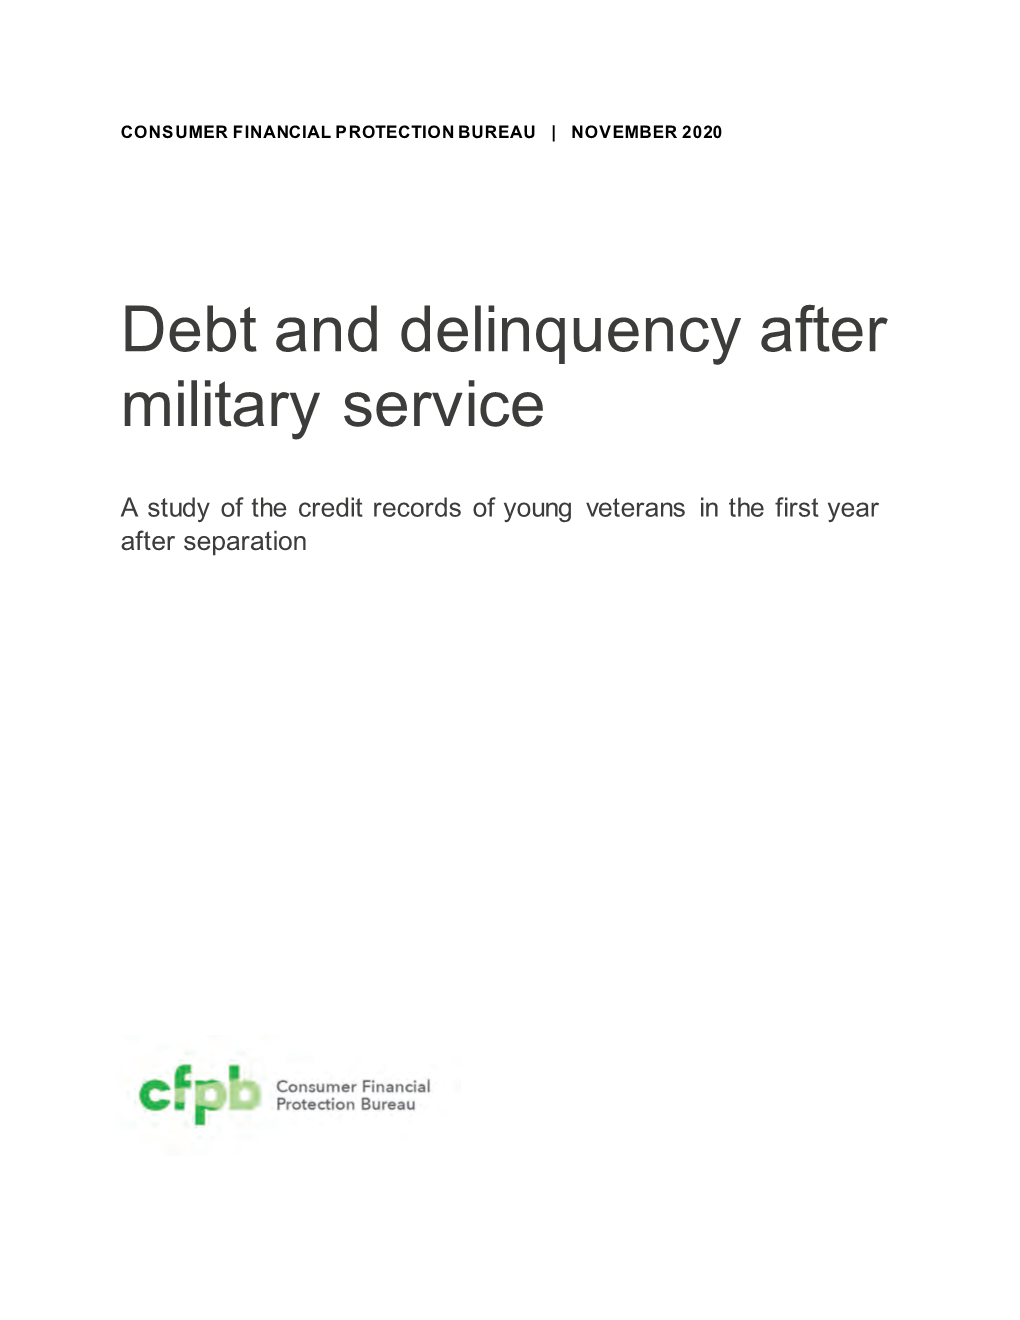 Debt and Delinquency After Military Service